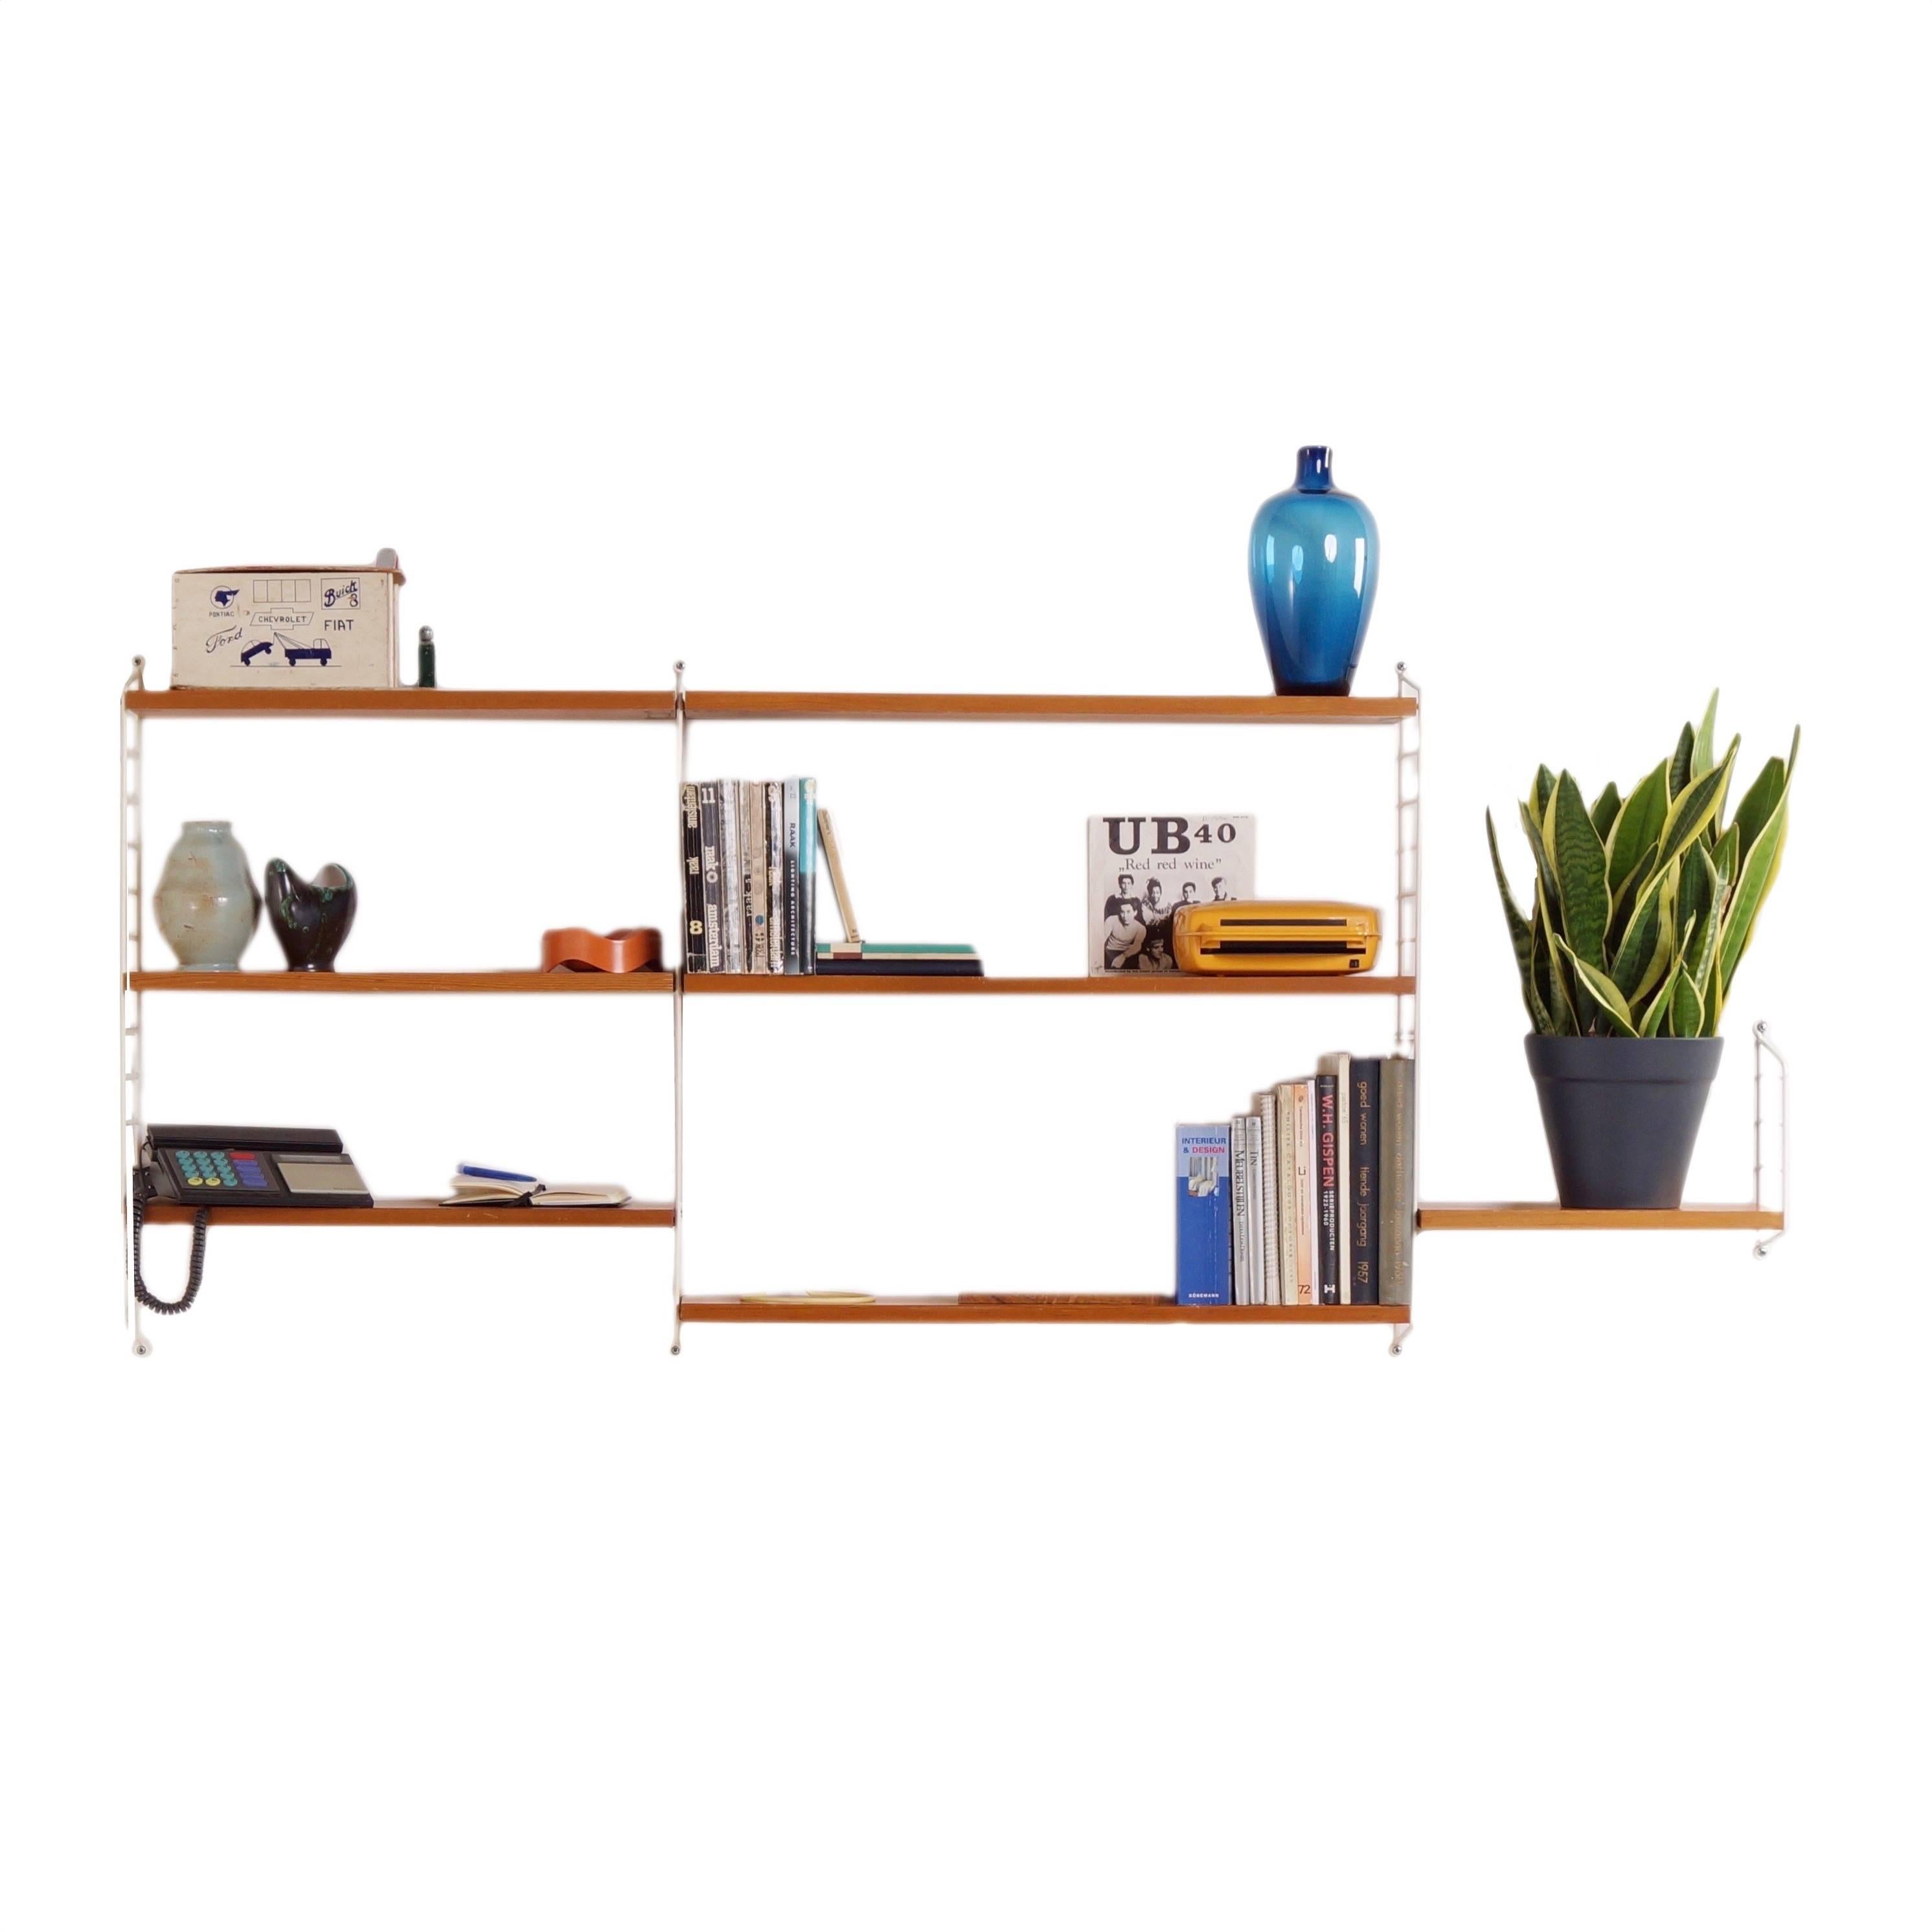 Vintage pine wall unit designed by Nisse Strinning for String Design AB in 1949. This is an original old system dating from 1962 and made in pine veneer. In 1954 this model (String) won a gold medal at the Triennale in Milan. The wall system can be